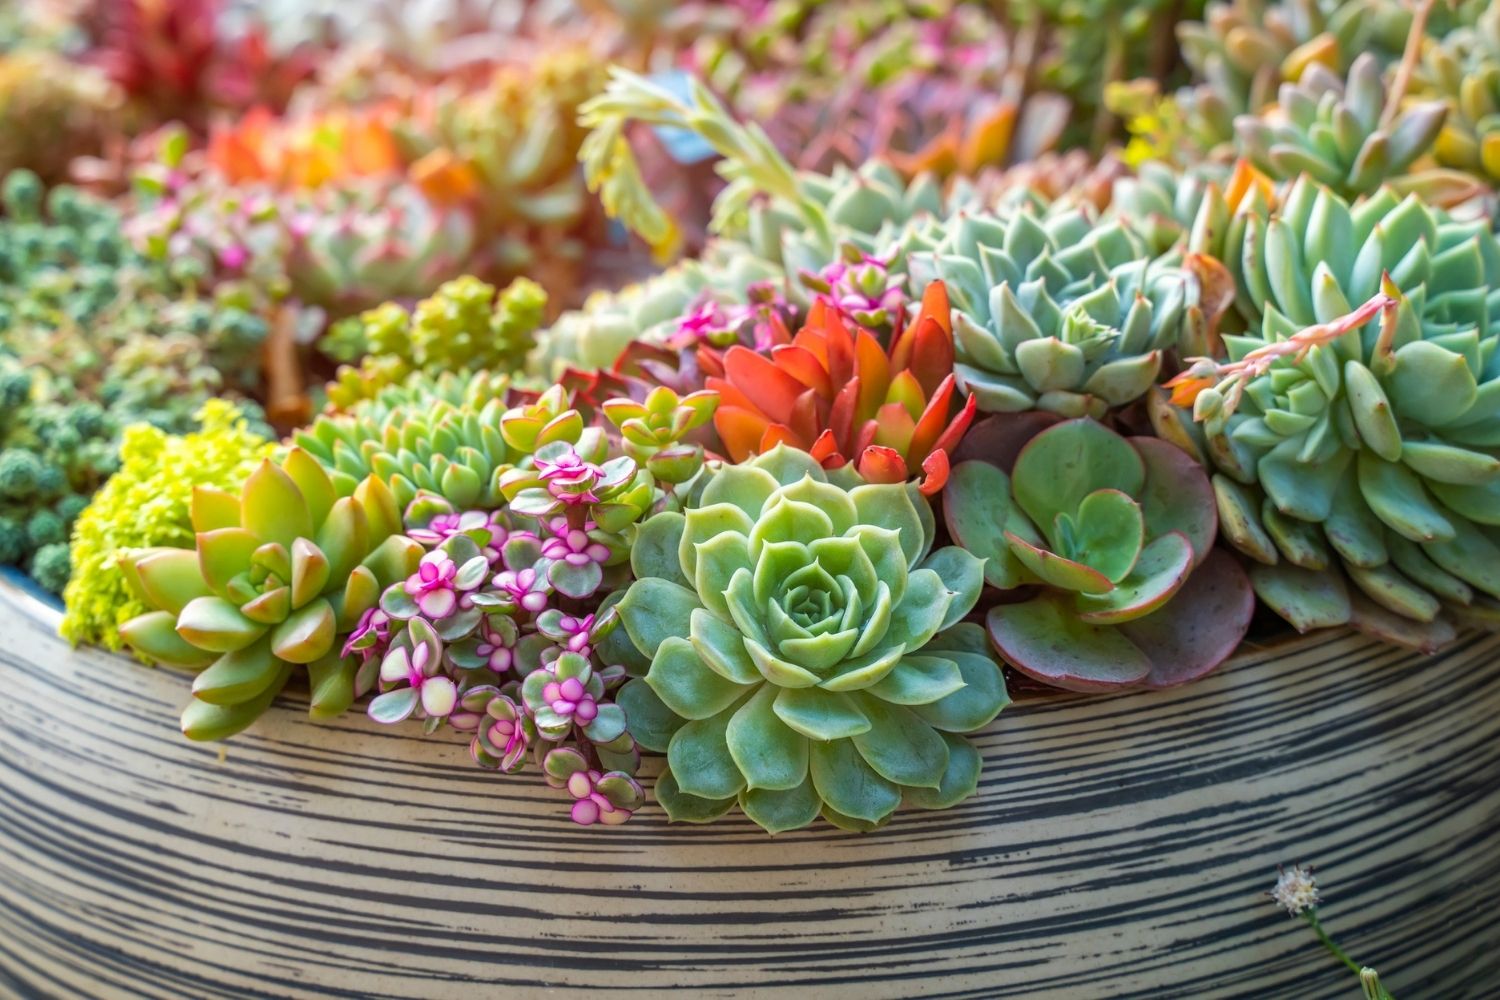 Easy Succulent Starter Kits: How To Use A Succulent Plant Kit